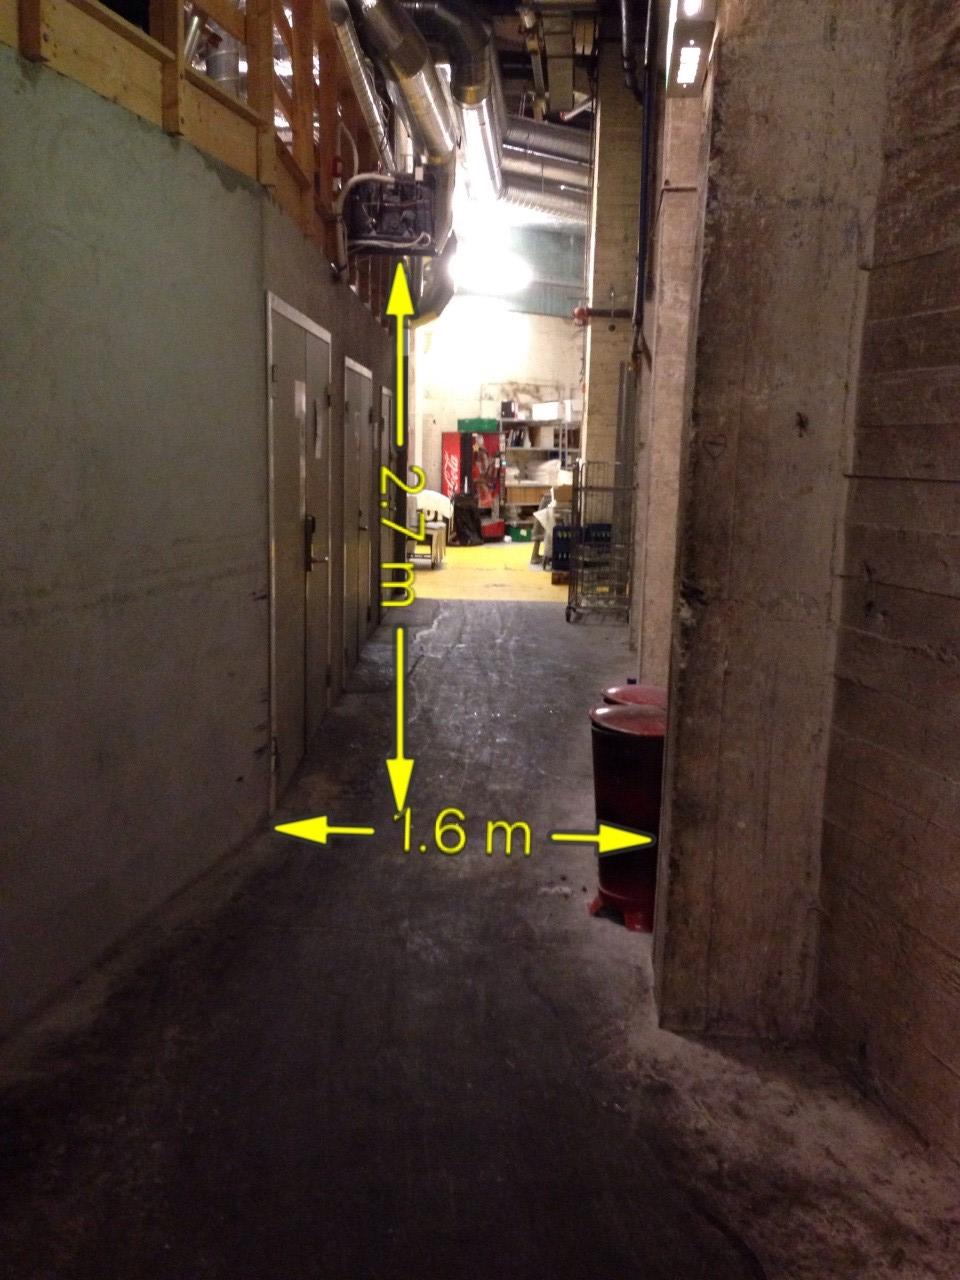 Lift 2: 2.000 kg, width 2,15 m, length 3,35 m, height limited by passageway, 2,7m. NB!